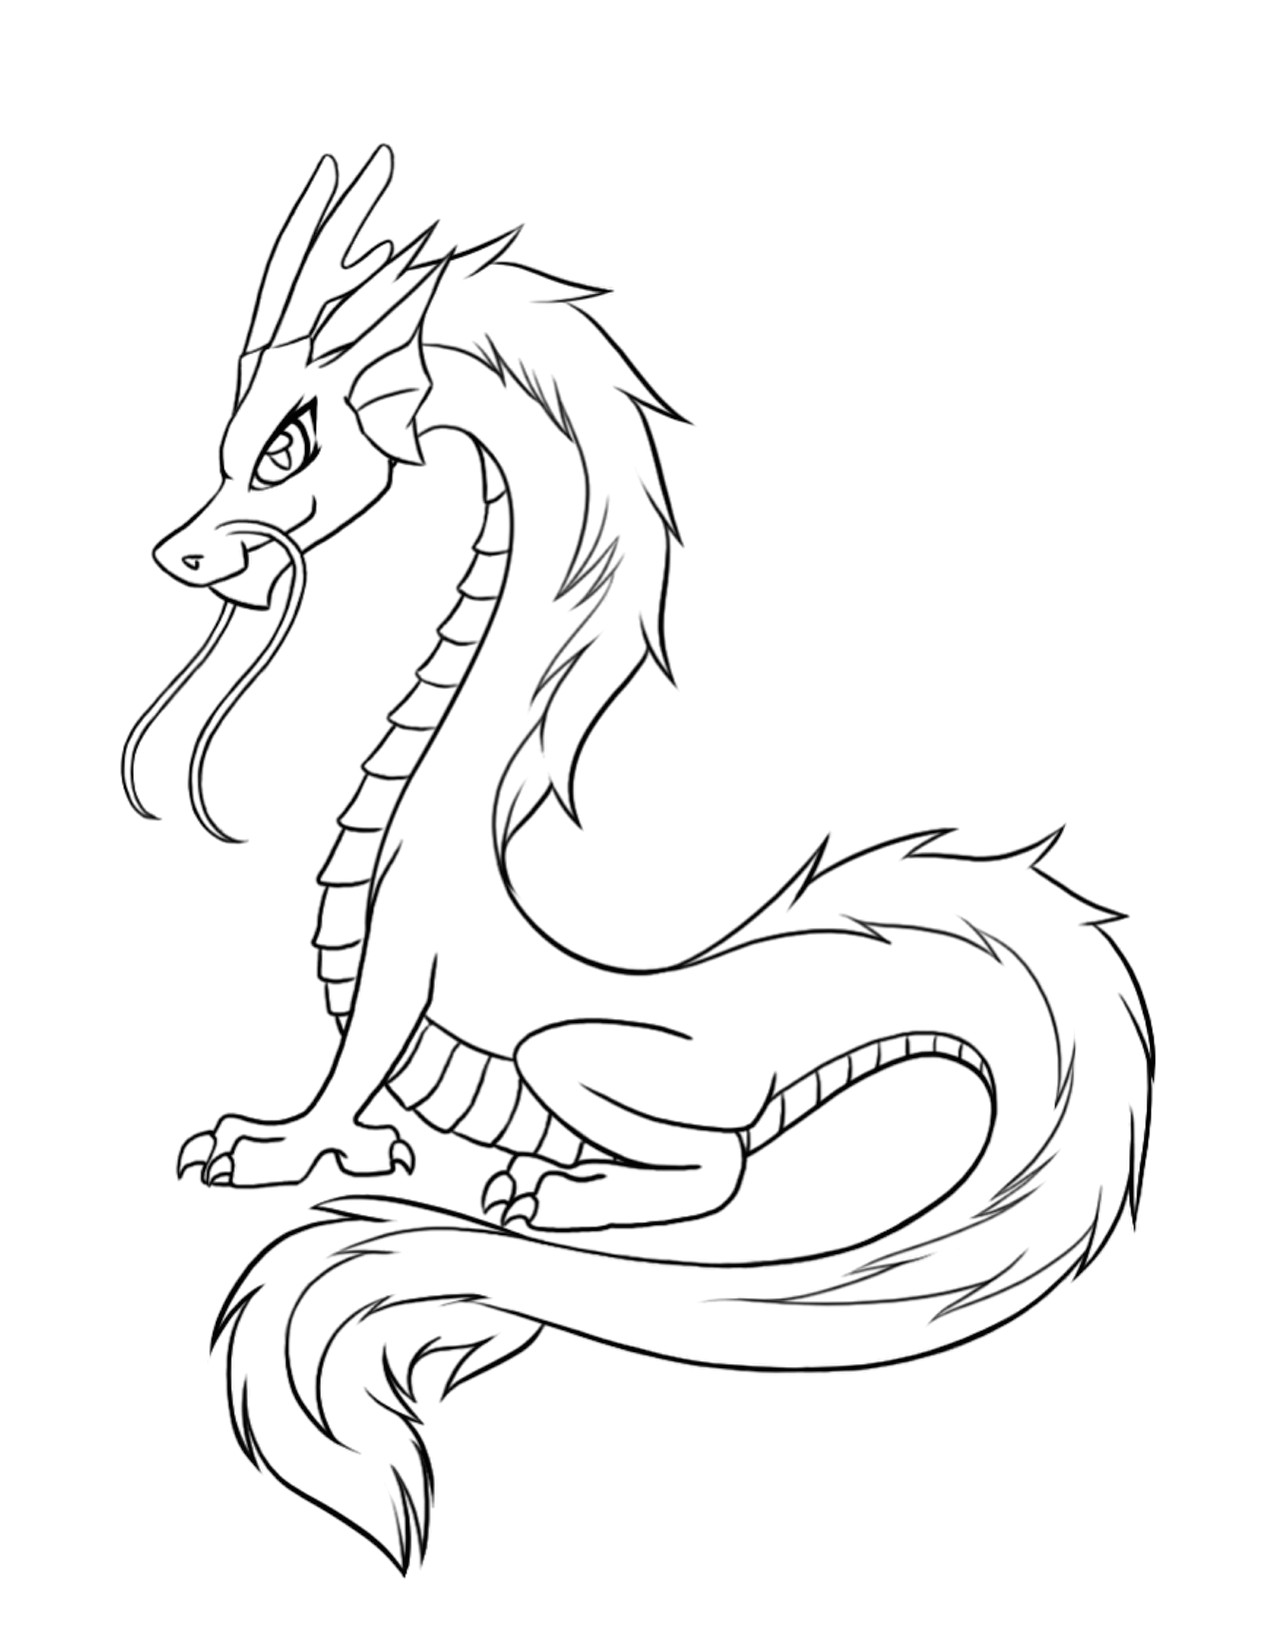 Dragons Drawing Colour Free Printable Dragon Coloring Pages for Kids Dragon Sketch